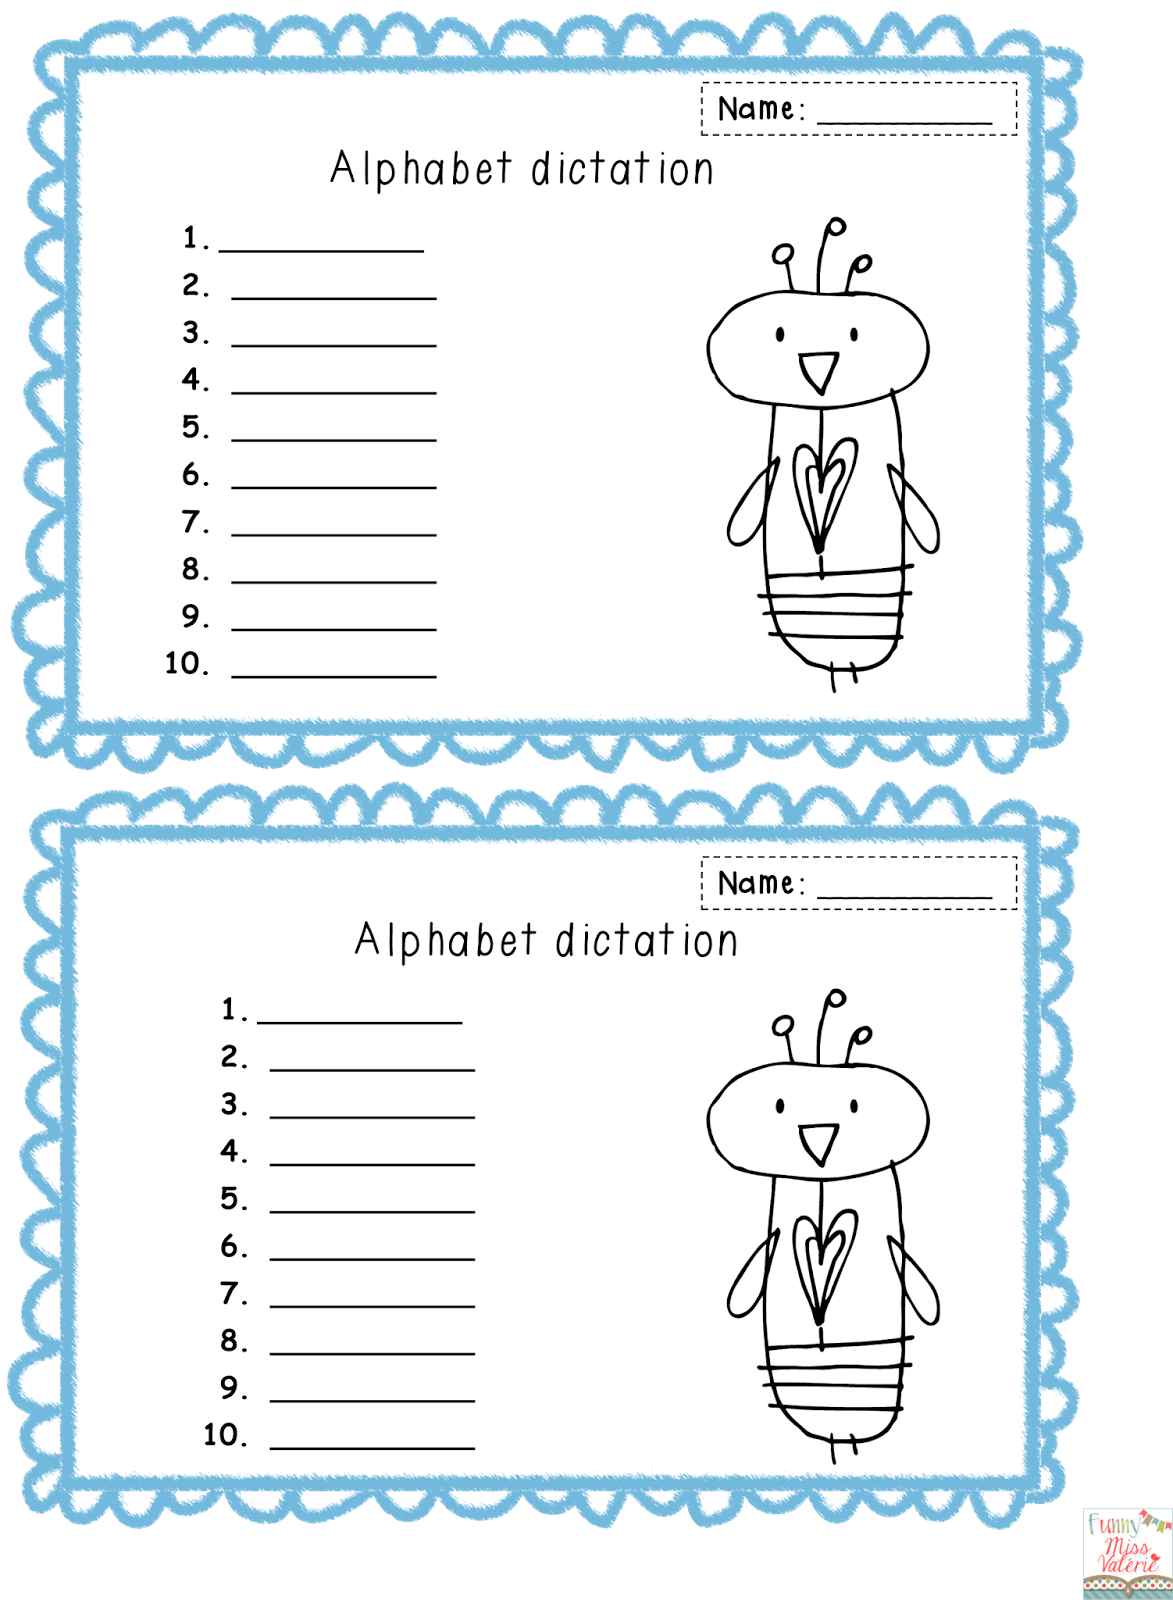 handwriting-clipart-dictation-handwriting-dictation-transparent-free